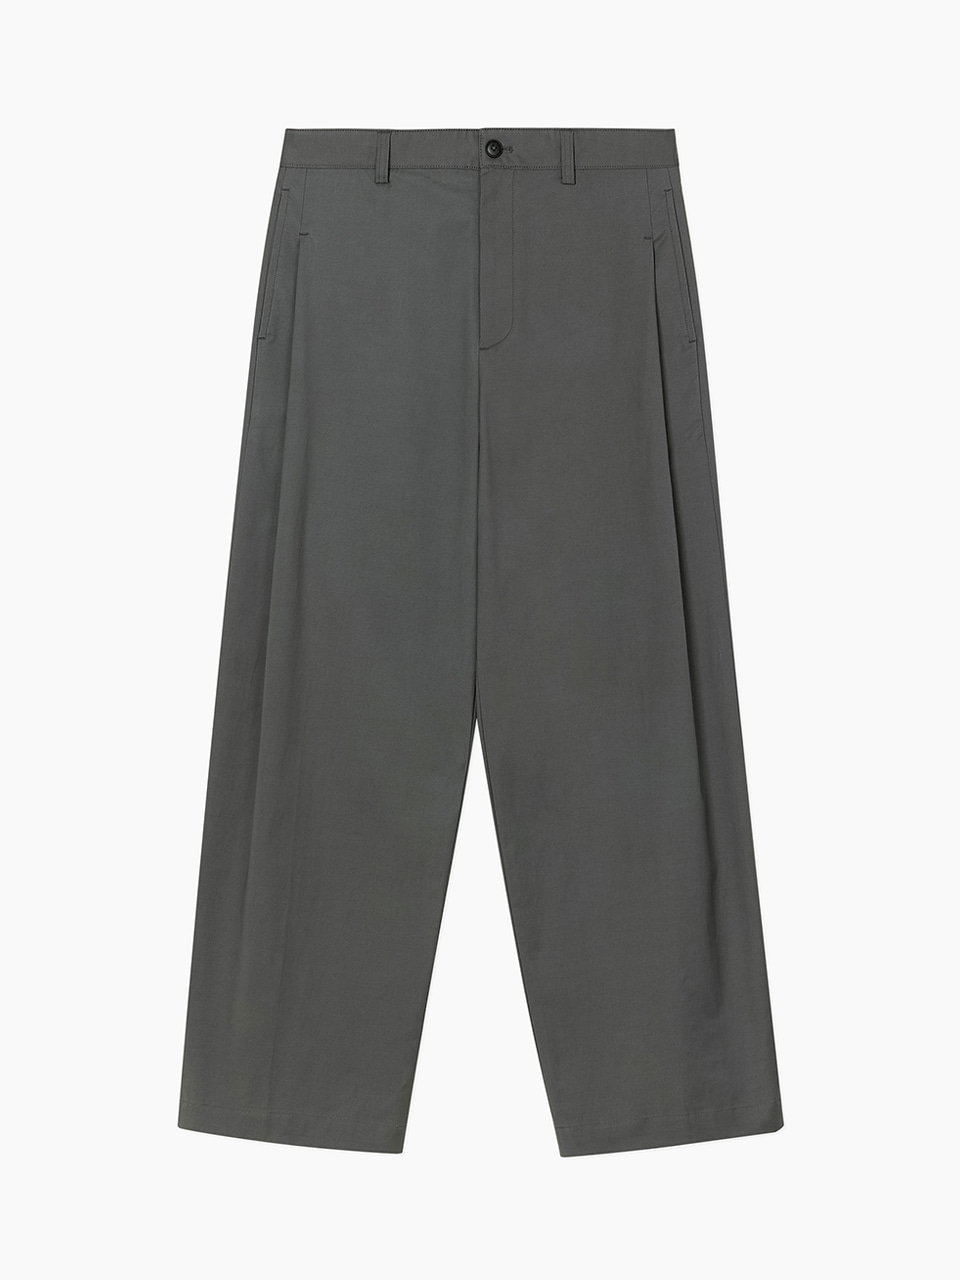 Twill Cotton Side Tuck Pants (Charcoal)